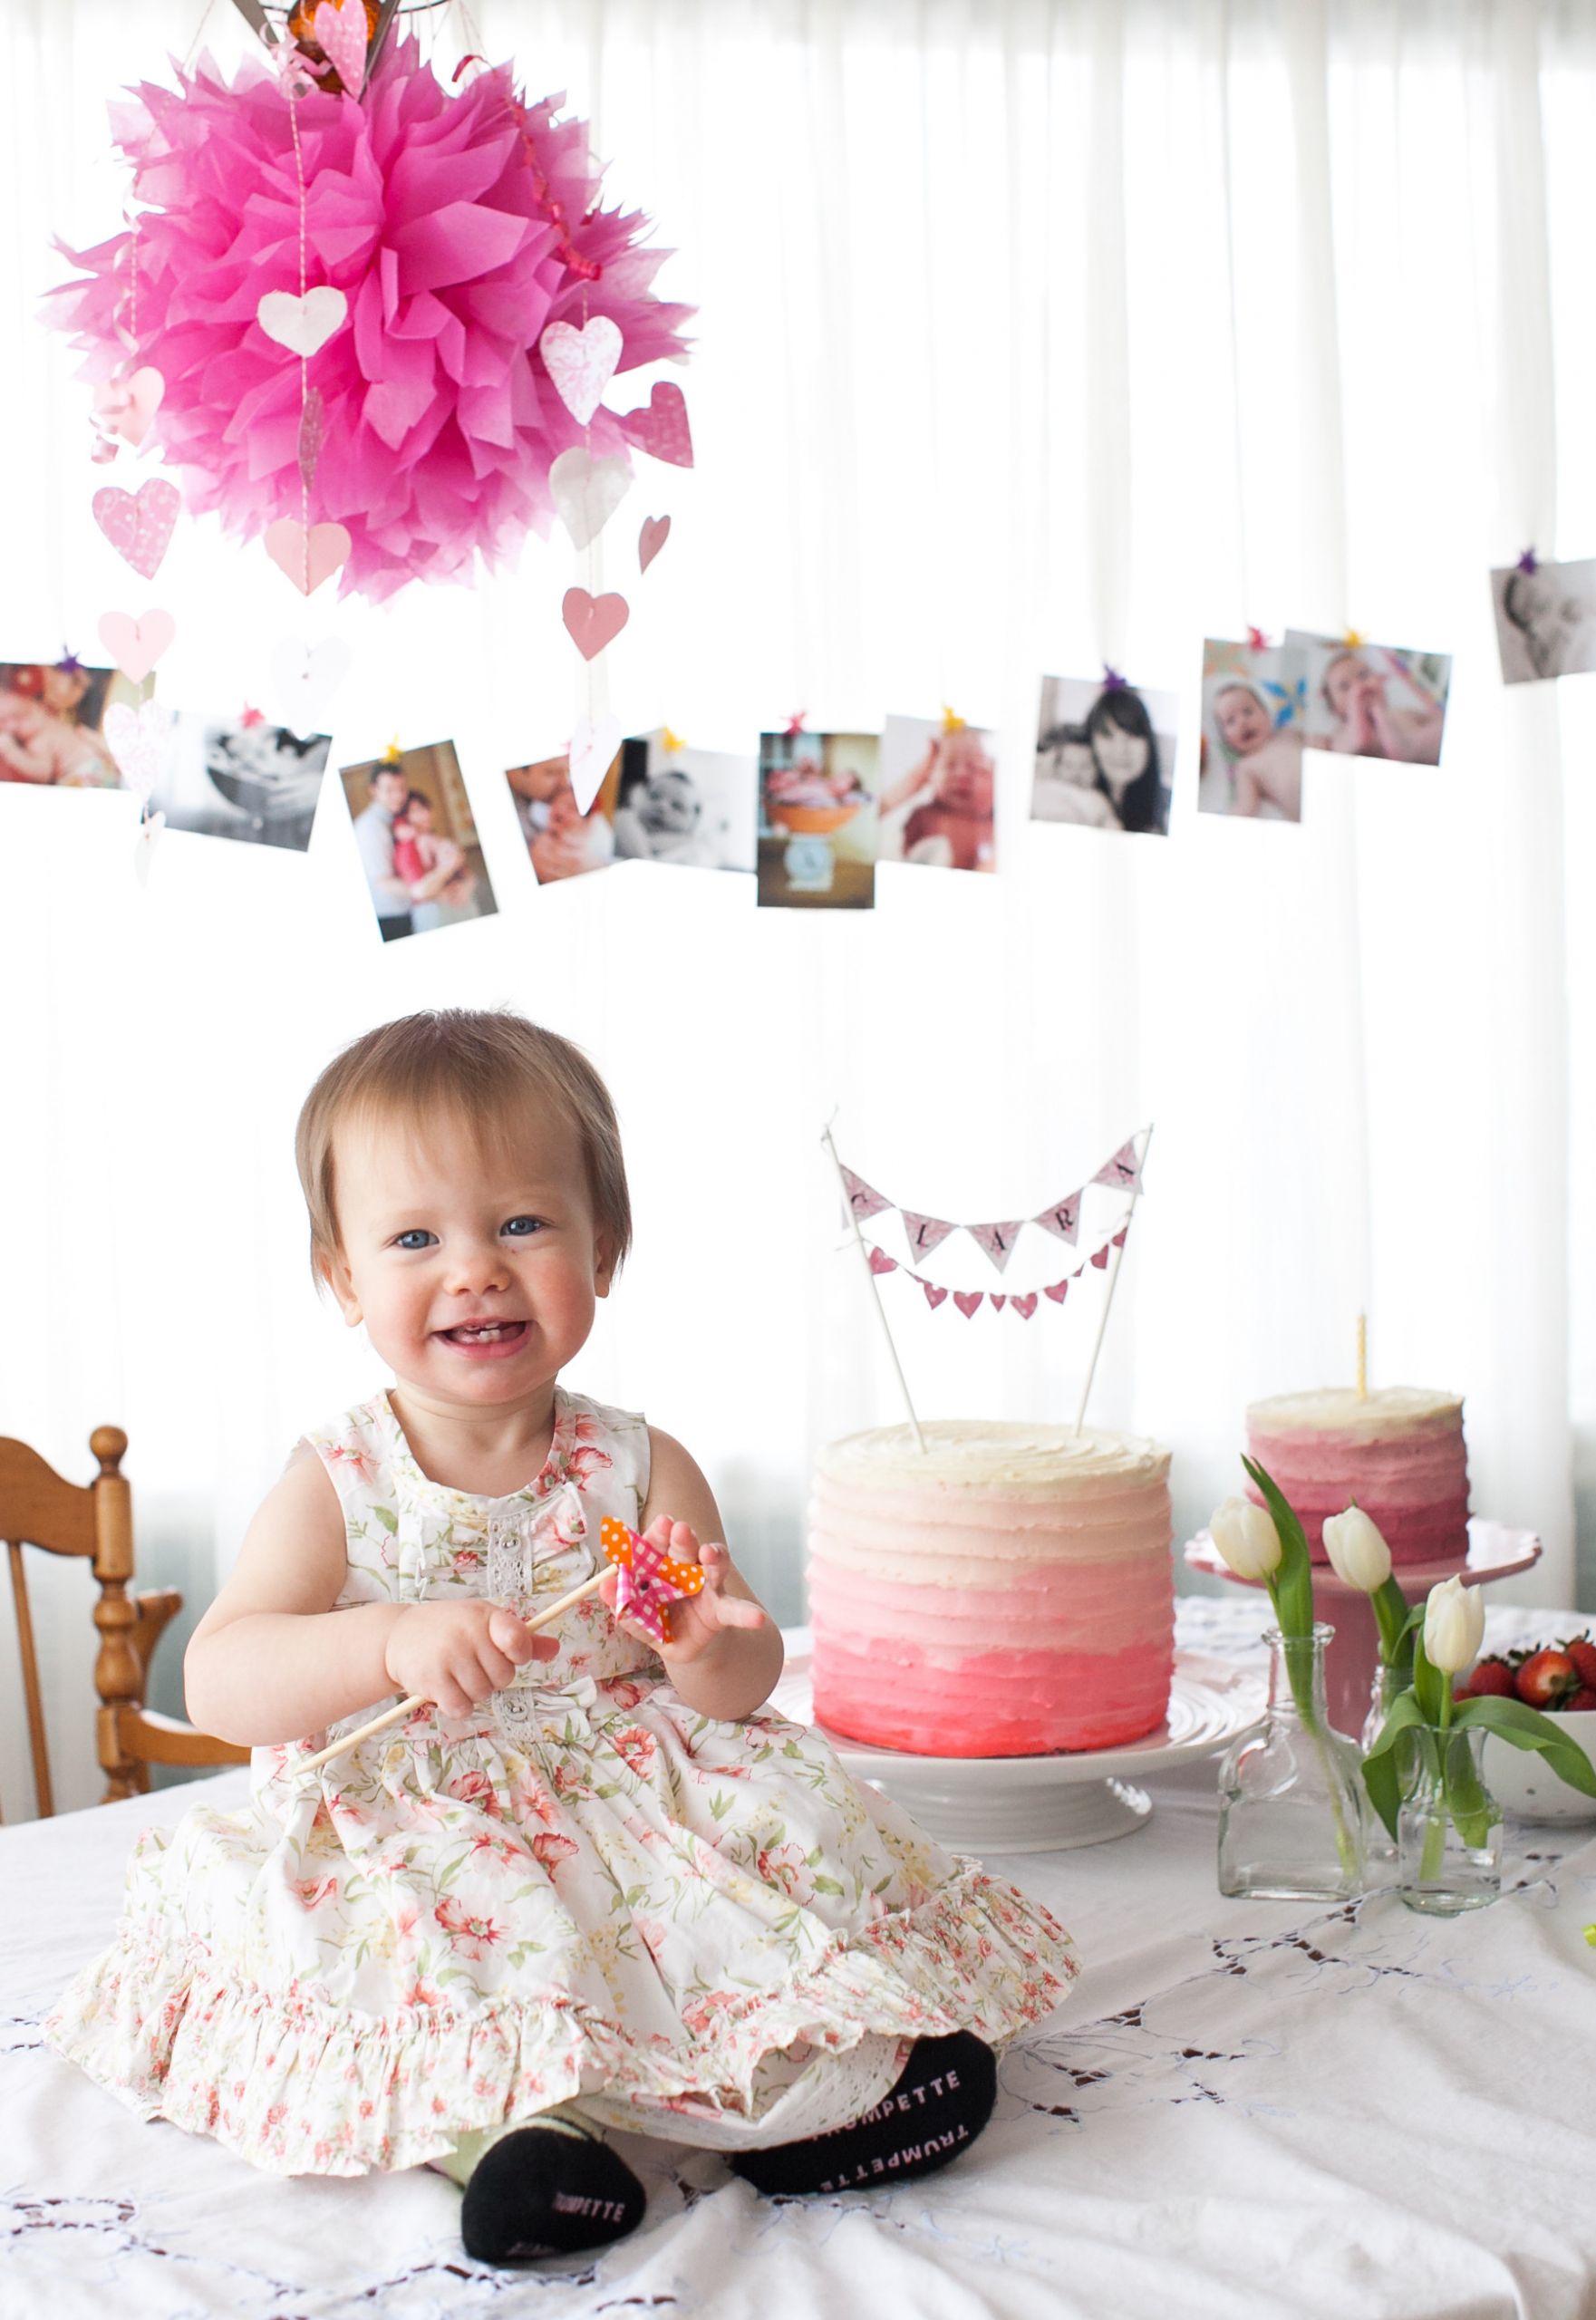 Birthday Gift Ideas For Baby Girl
 First birthday party ideas recipe Apple Spice Cake with